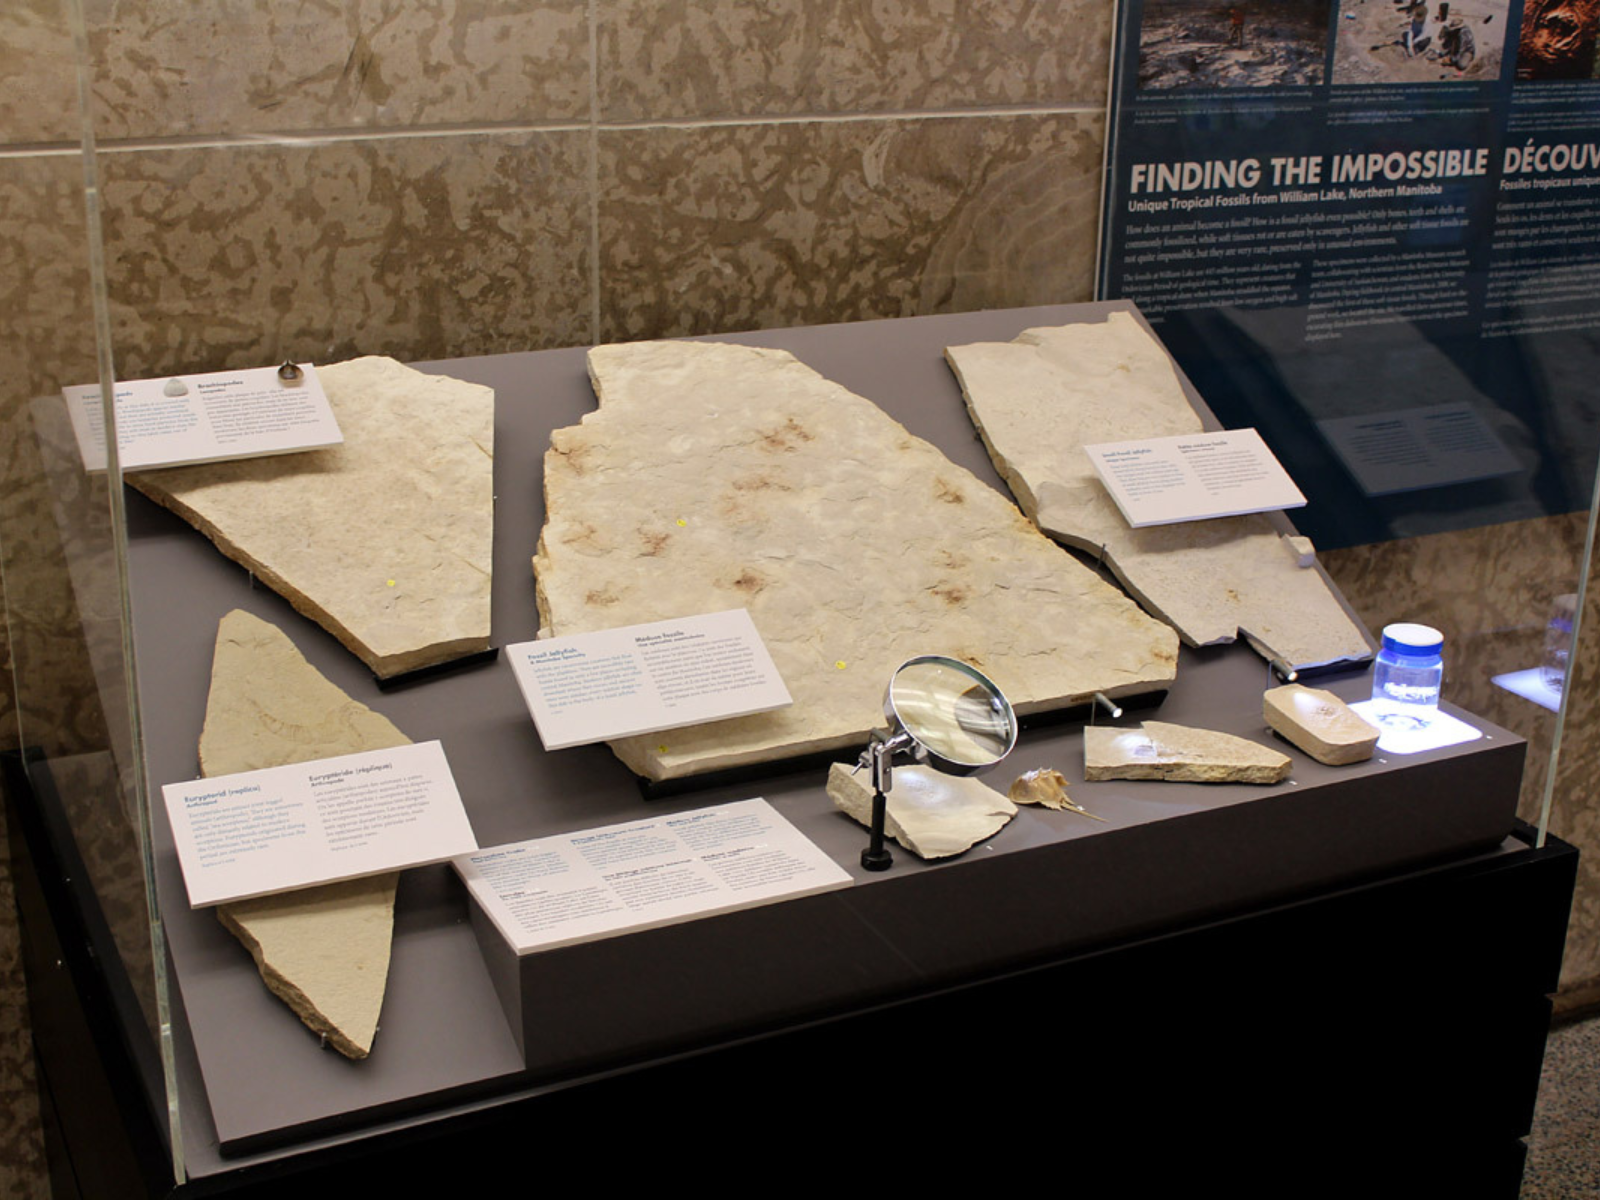 A closer look at the contents of the display case in the previous picture. Eight fossil specimens with label copy providing more information about them. One smaller piece has a magnifying glass set up in front of it.